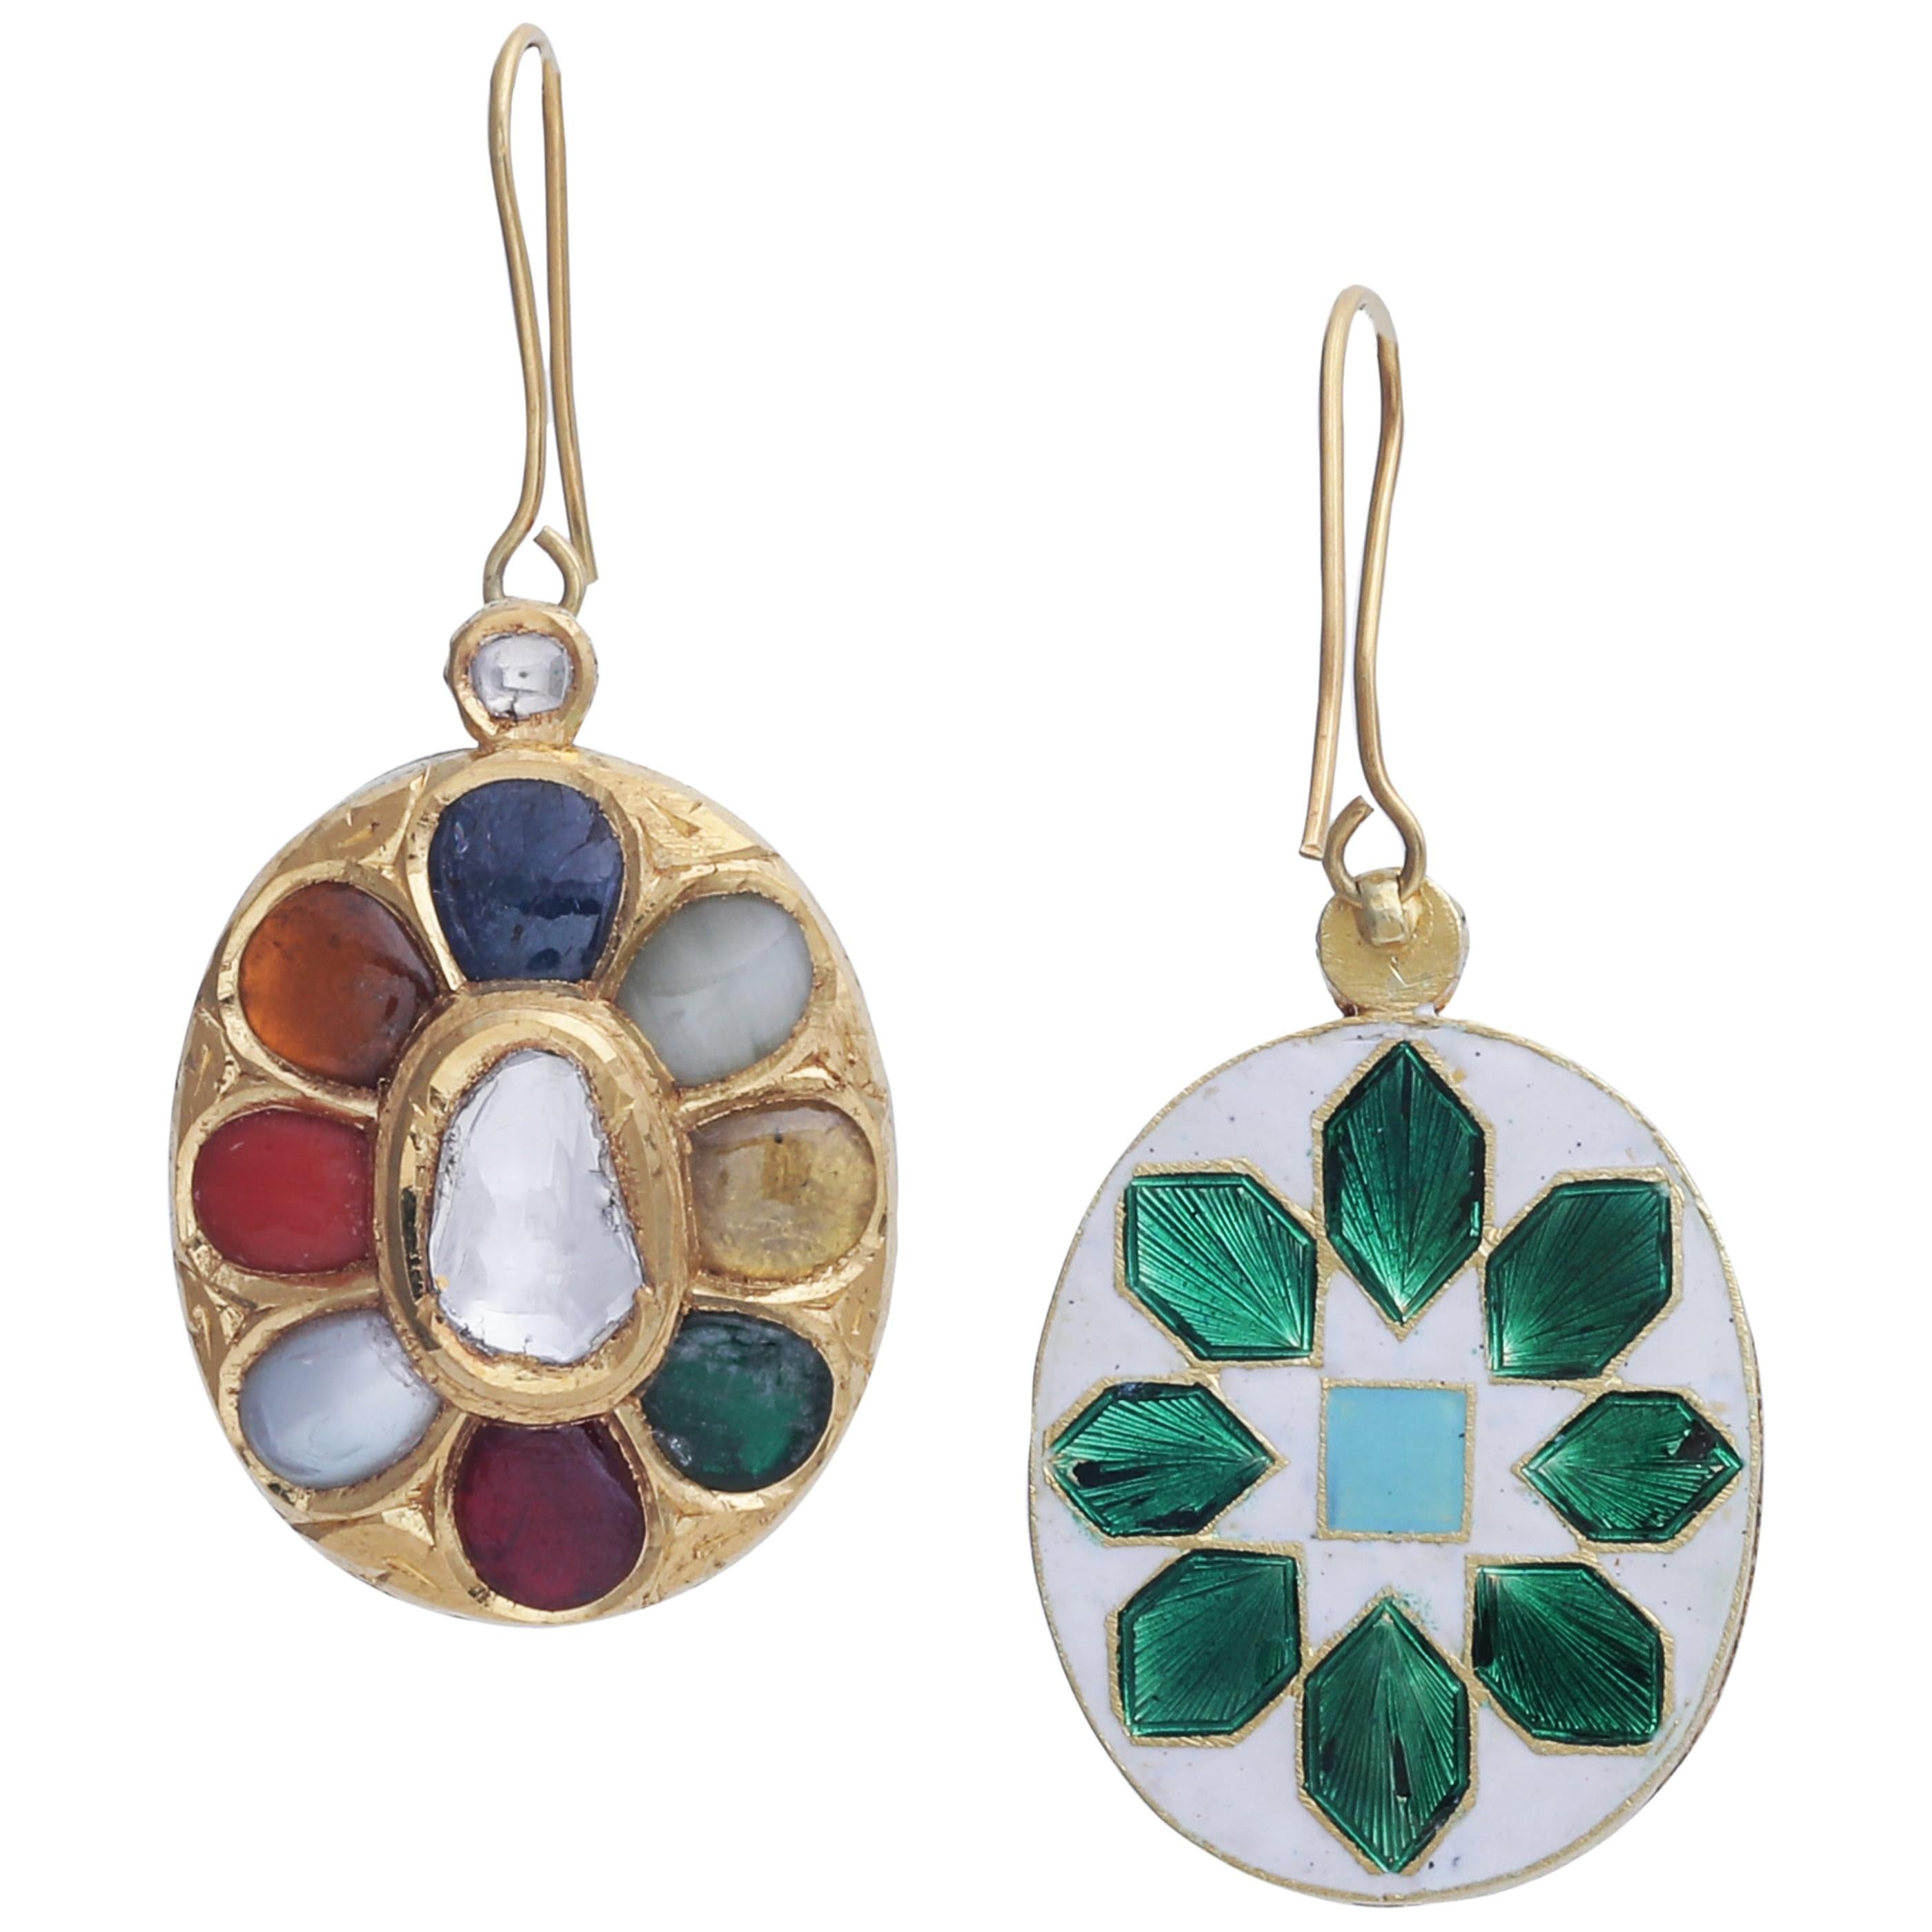 Hanging Earrings with Lucky Nine Gems Handcrafted in 22k Gold with Enamel Work